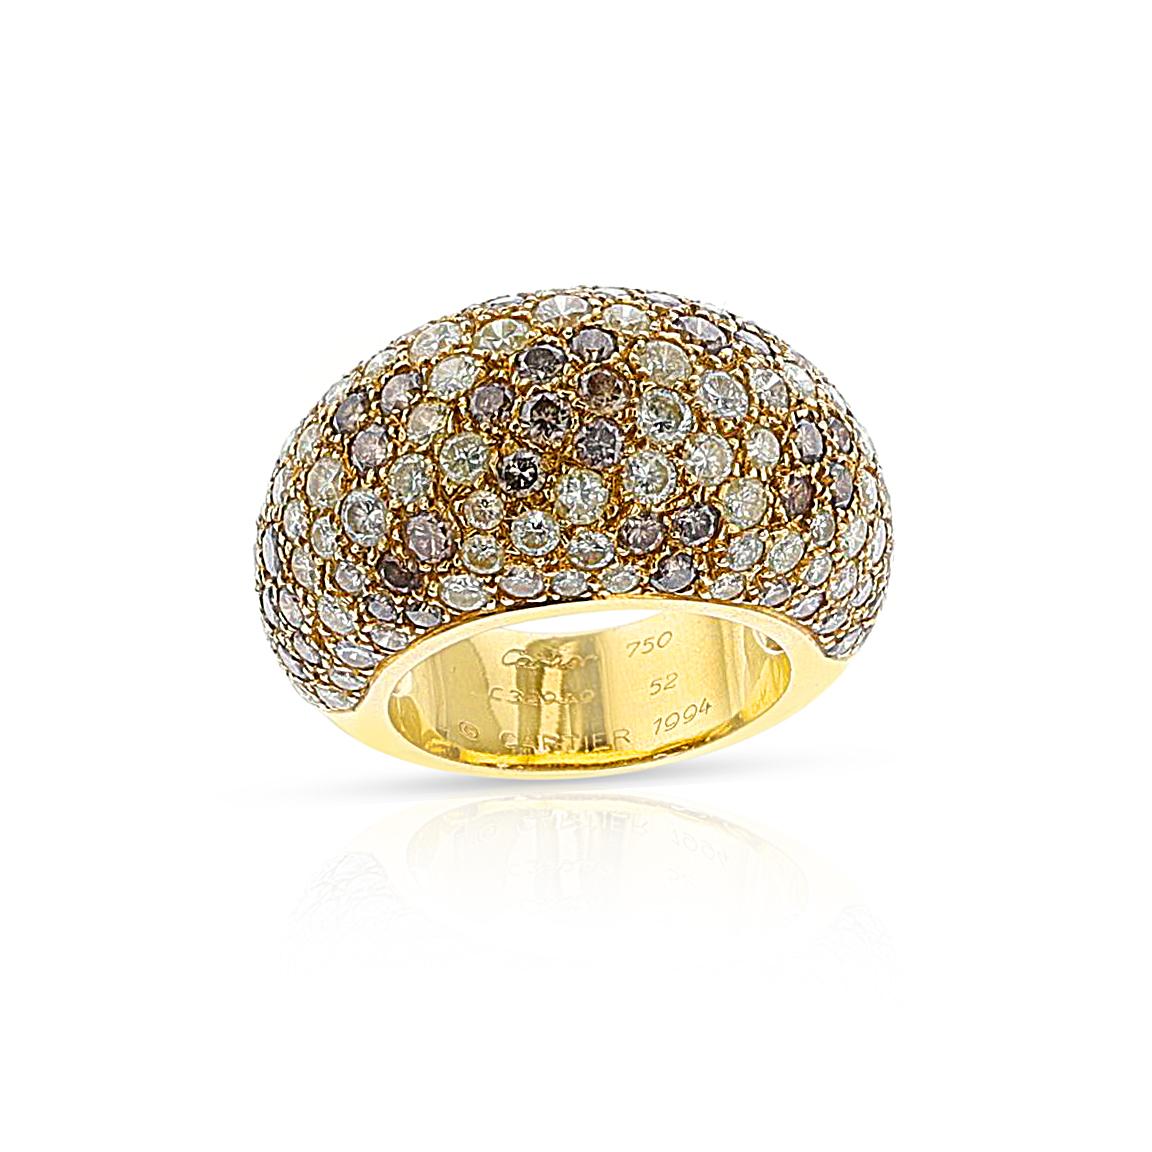 Cartier France Diamond and Colored Diamond Bombe Ring, 18k In Excellent Condition For Sale In New York, NY